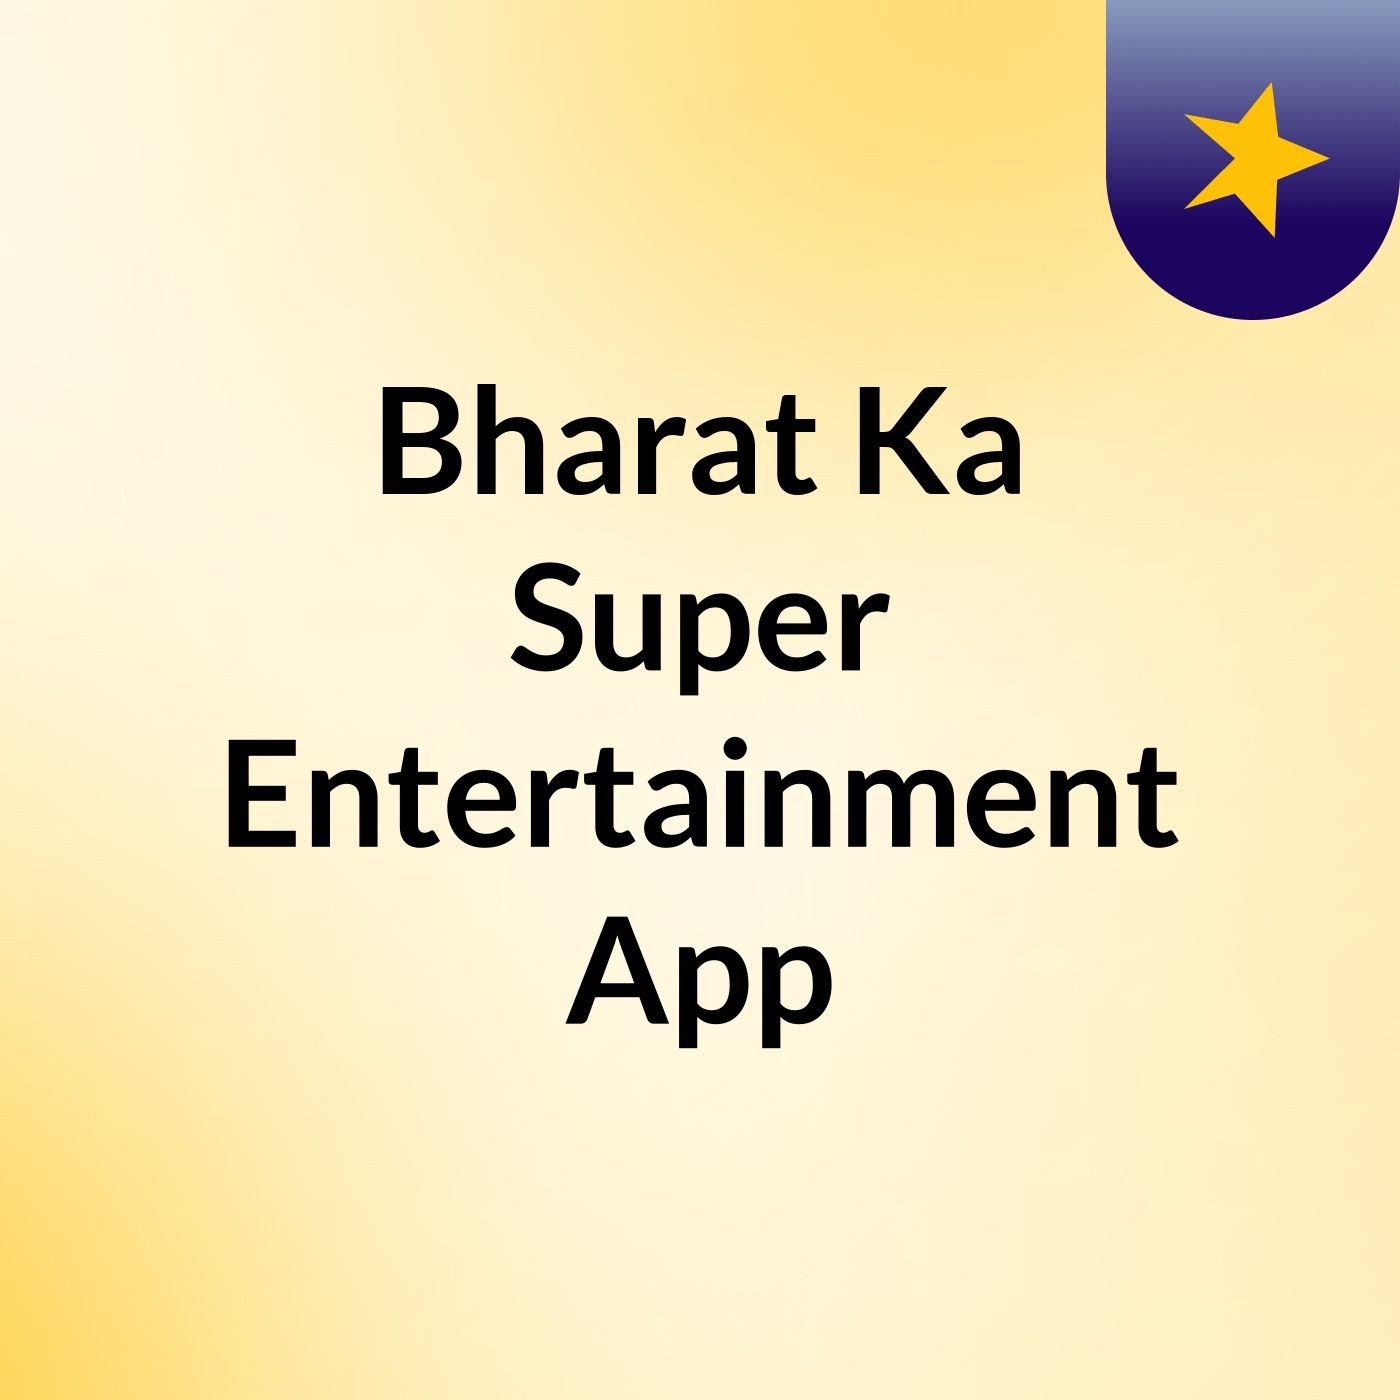 04 Best Short Video App Made In India